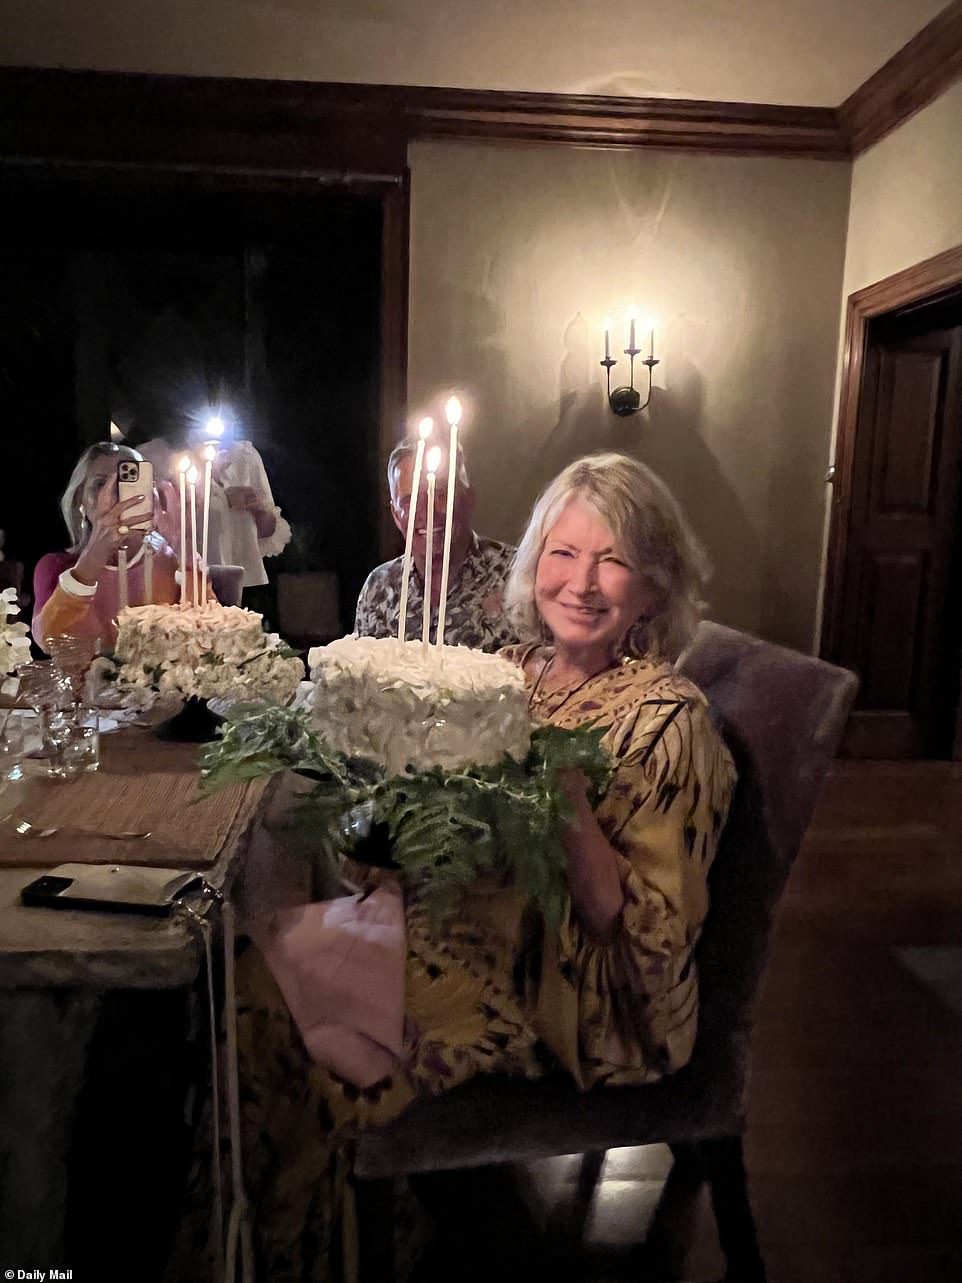 Glowing: Businesswoman poses with her cake to take another photo of her amazing bash